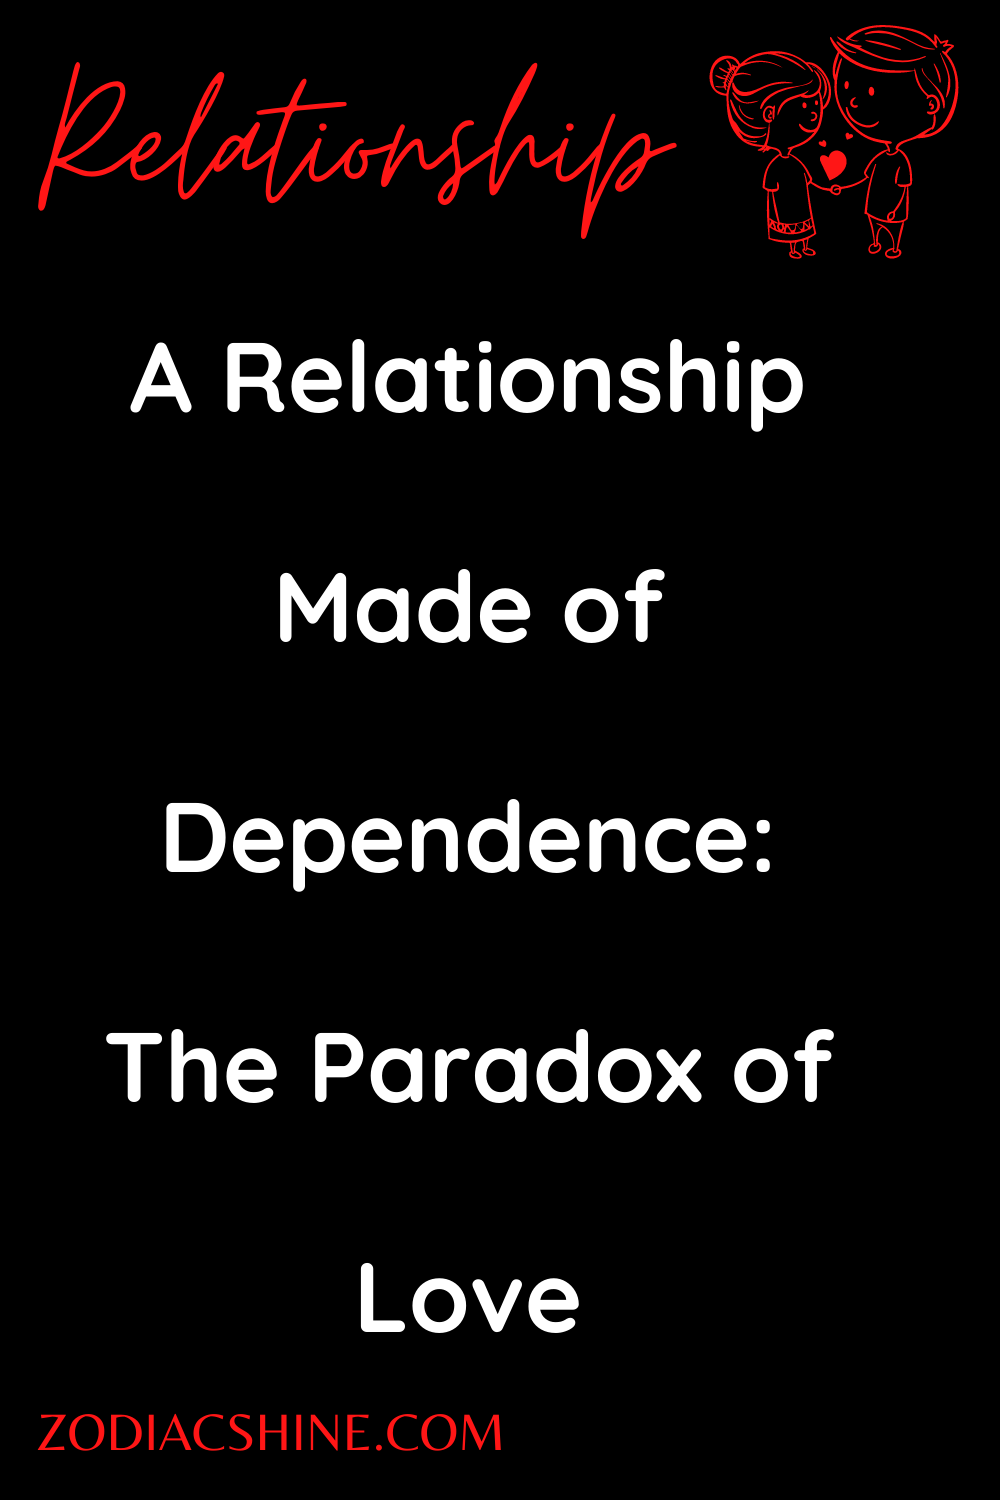 A Relationship Made of Dependence: The Paradox of Love